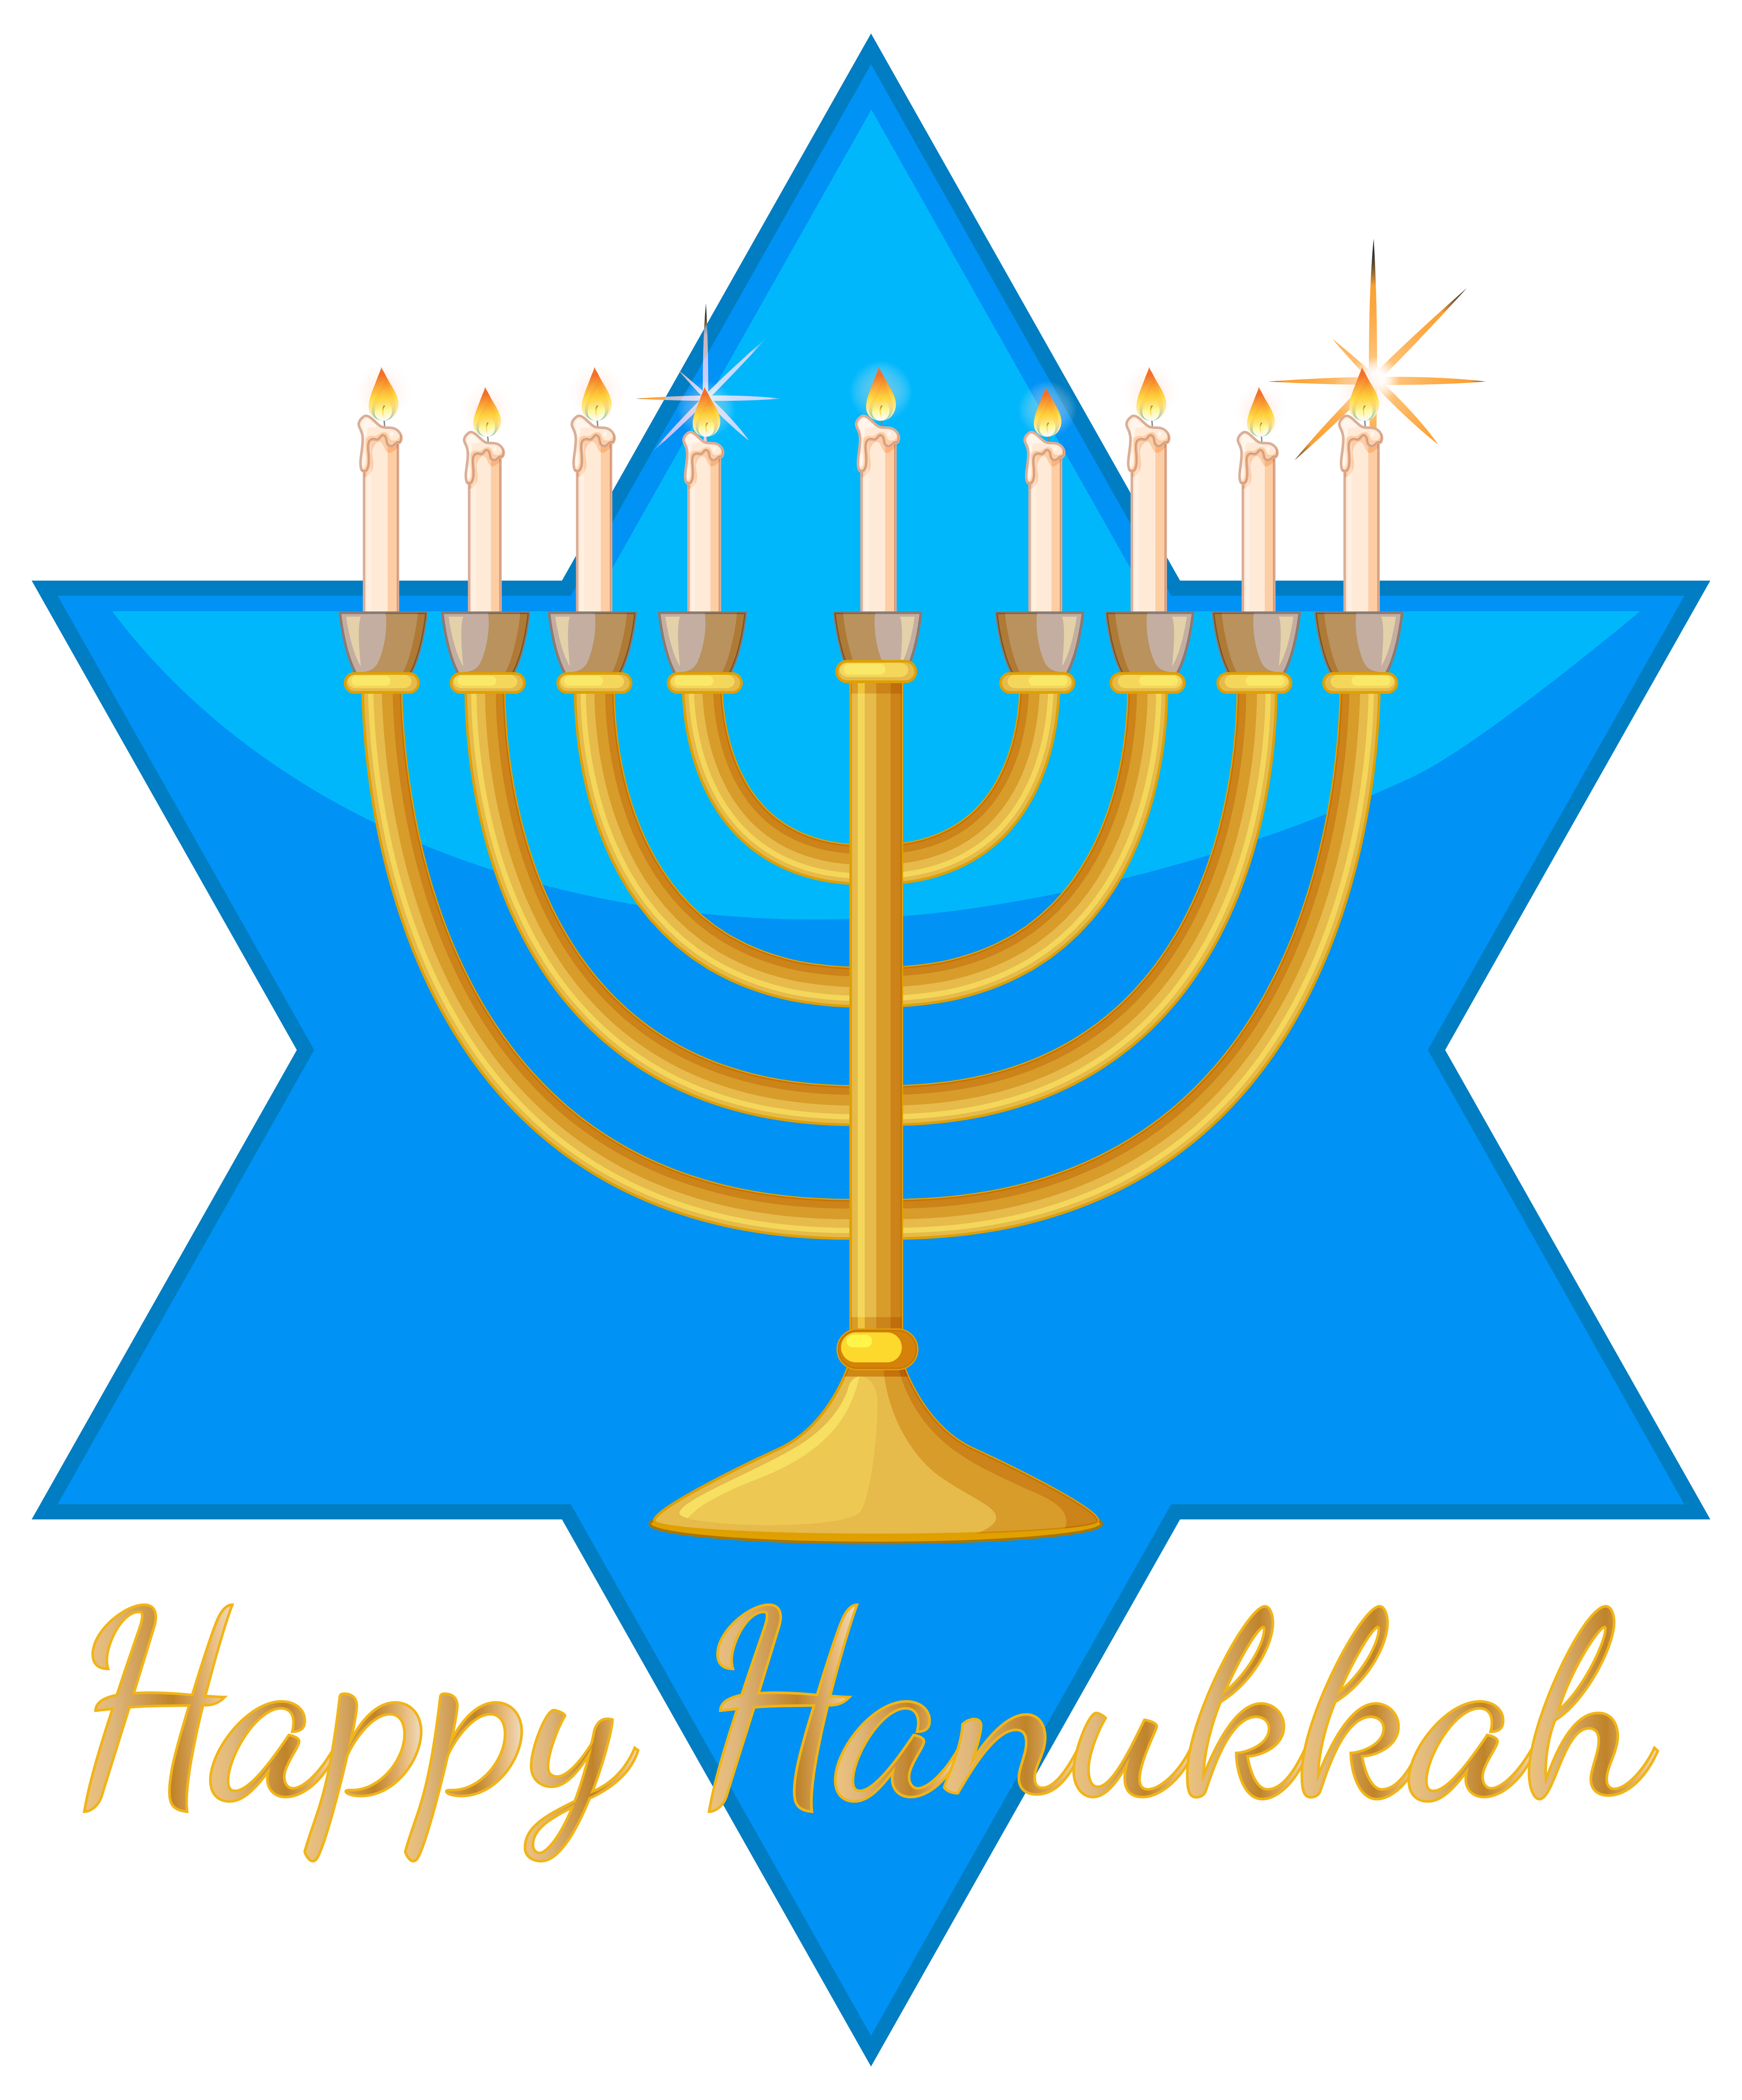 Download the Happy Hanukkah card template with blue star and lights 297581